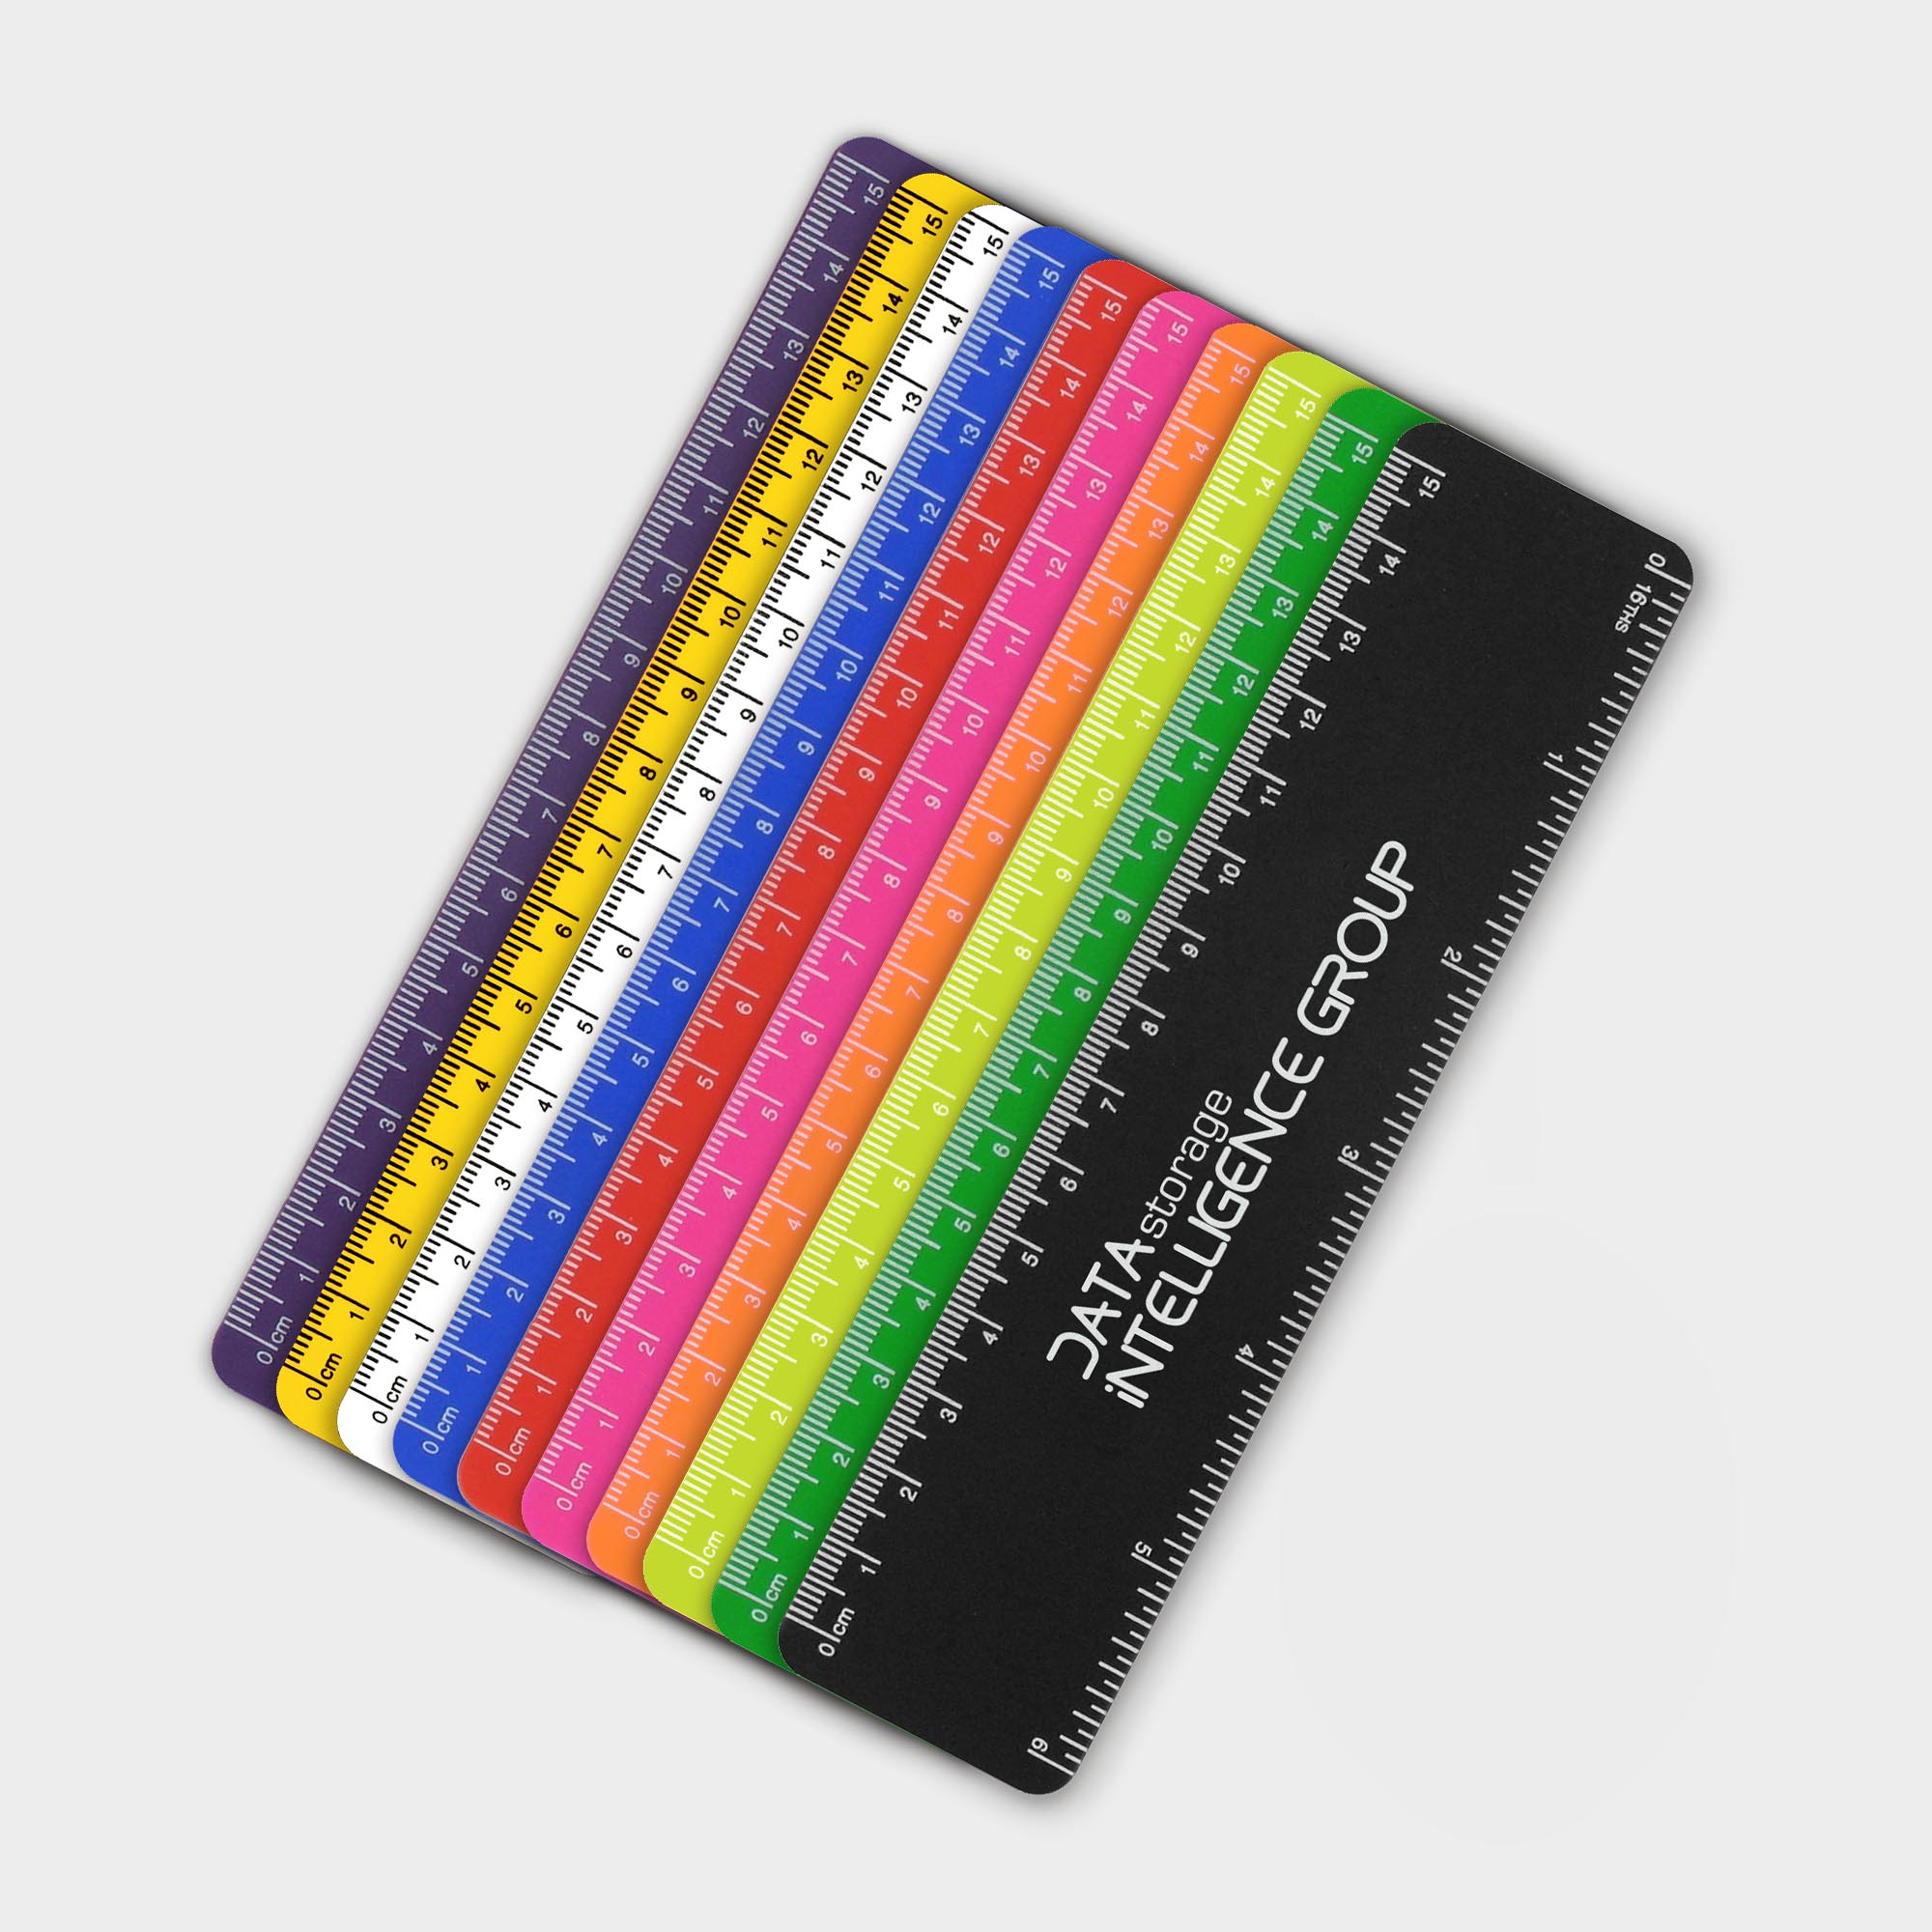 The Green & Good 15cm Flexi Ruler is made from recycled polypropylene. Made in the UK, it is very thin and light, perfect for mailers and as a give-away. Available in a selection of colours. 1 colour print only as standard. Digital print is only available on the white ruler.